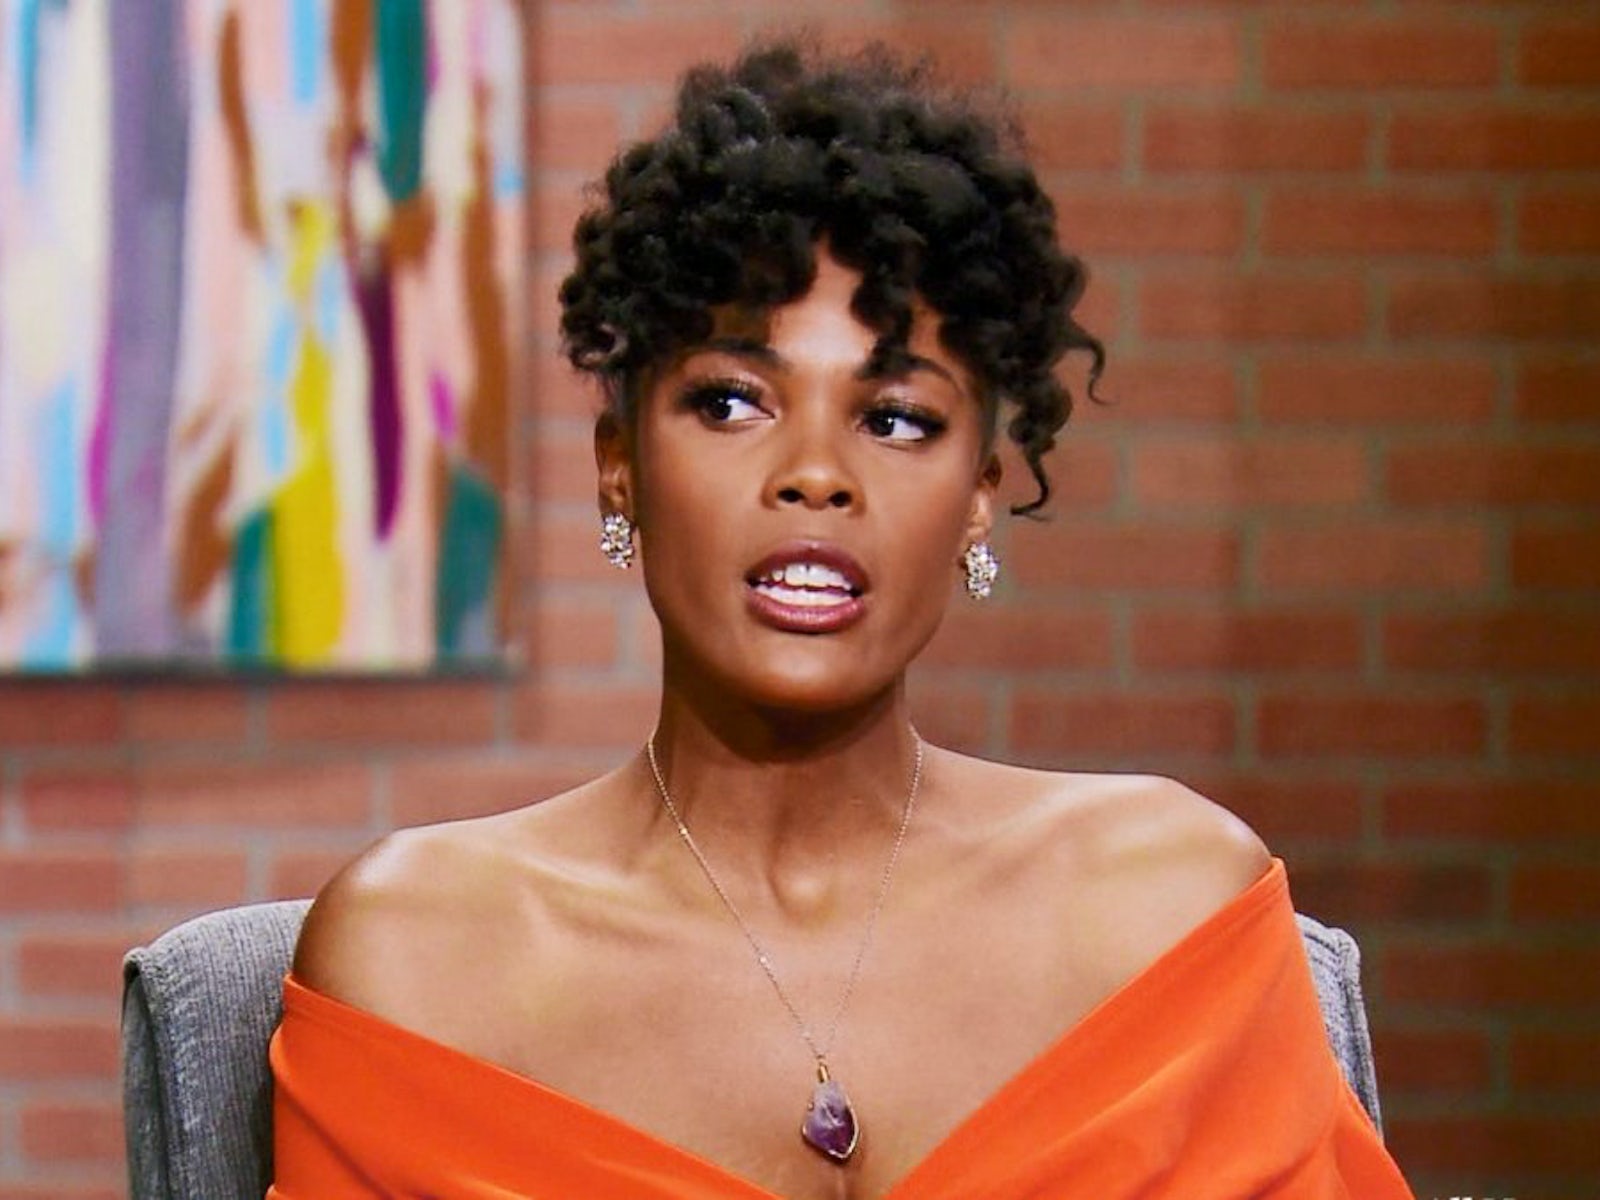 Married at First Sight alum Iris Caldwell Im proud Meka Jones brought Michael Watsons alleged off-screen ultimatum up, I shouldve done similarly with Keith Manley photo